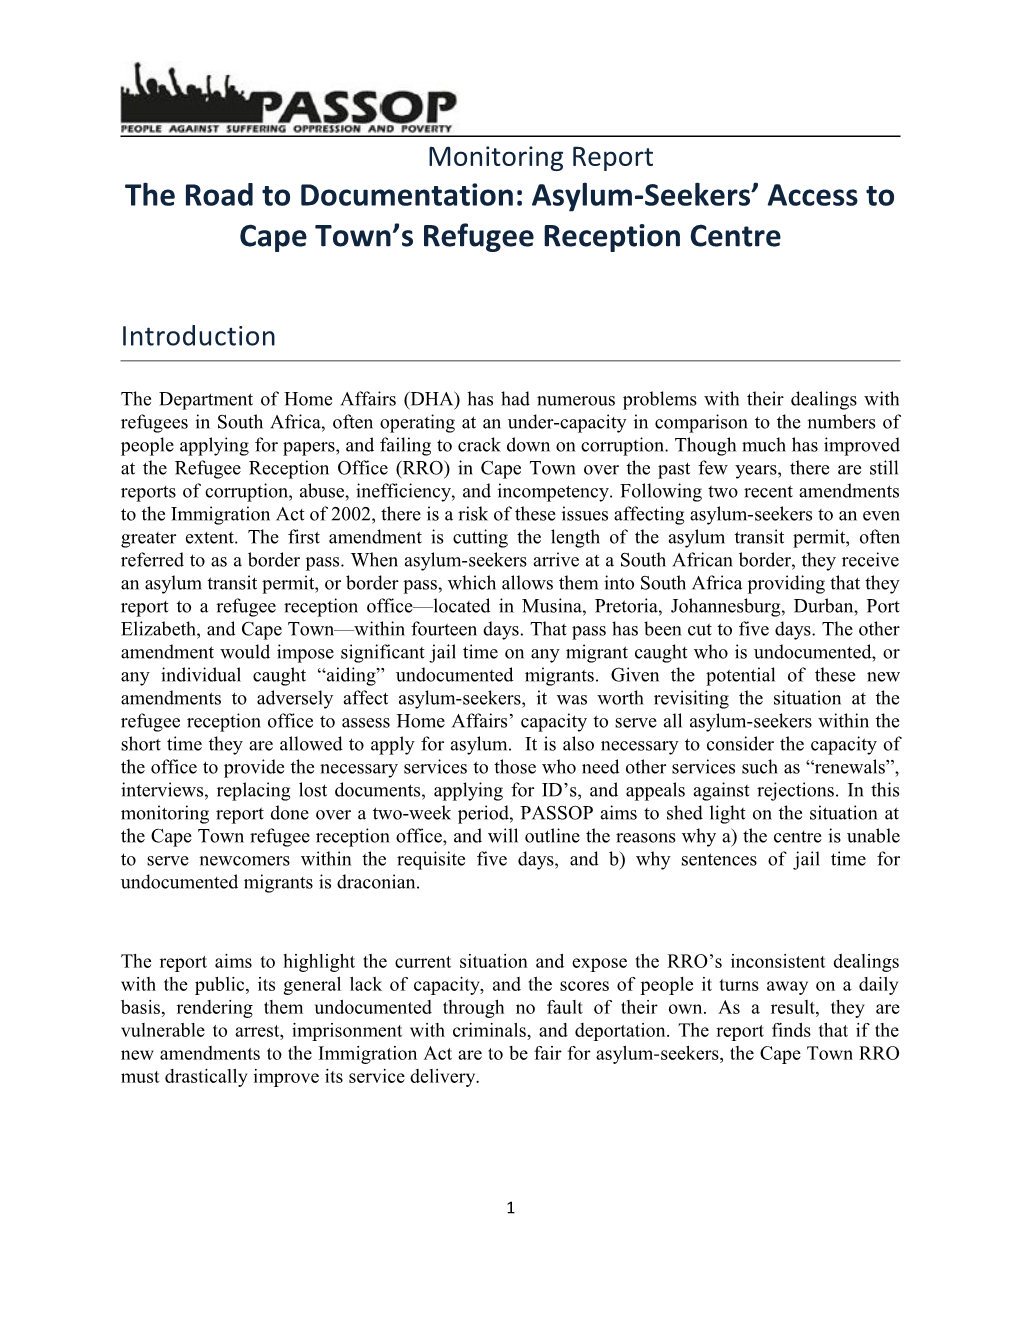 The Road to Documentation: Asylum-Seekers Access to Cape Town S Refugee Reception Centre